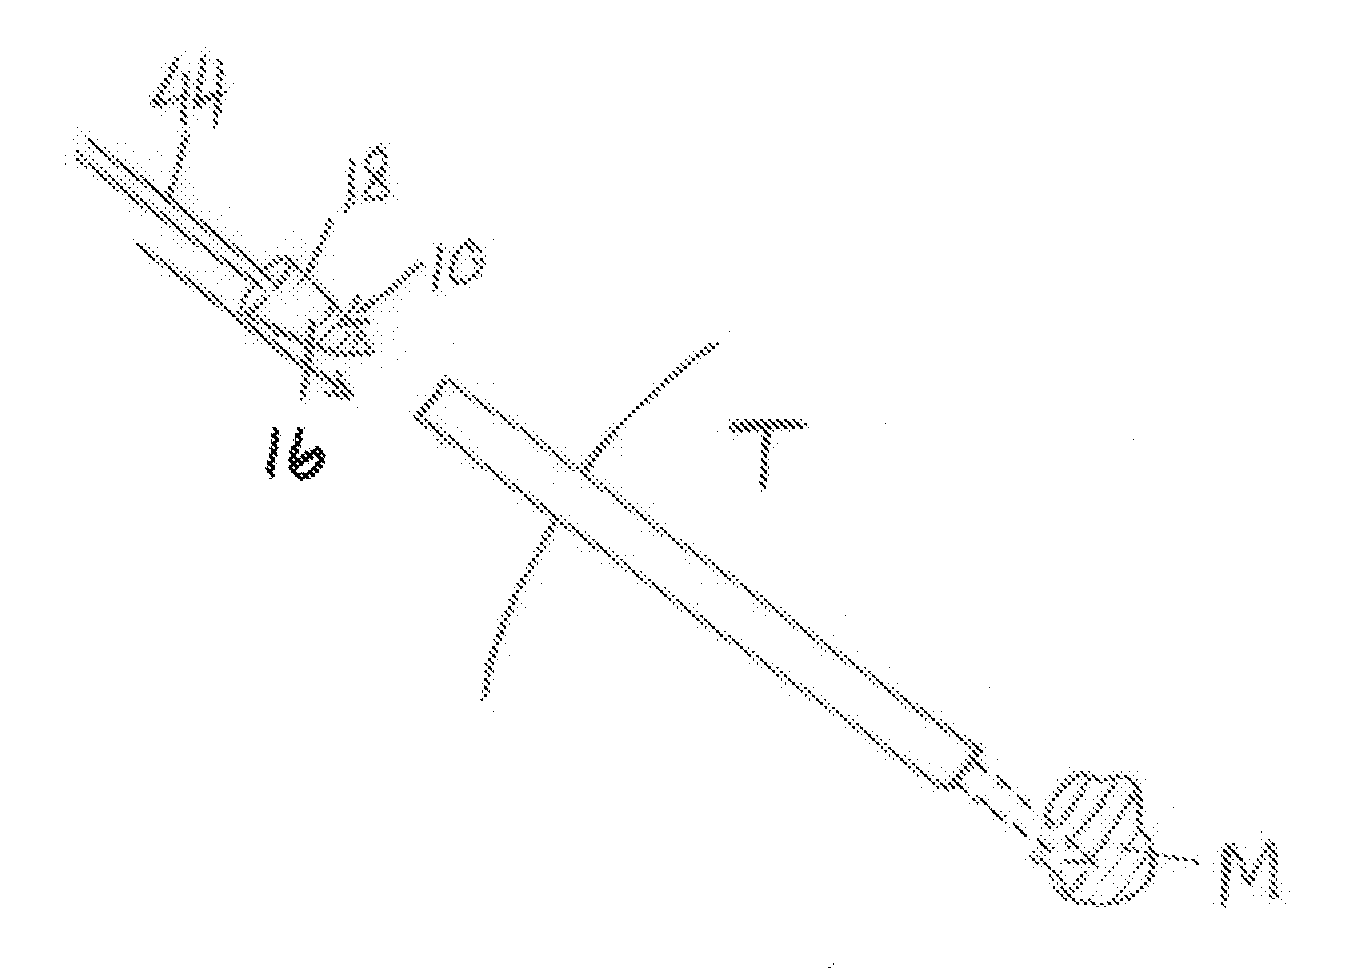 Malignancy removal with tissue adhesive secured structure